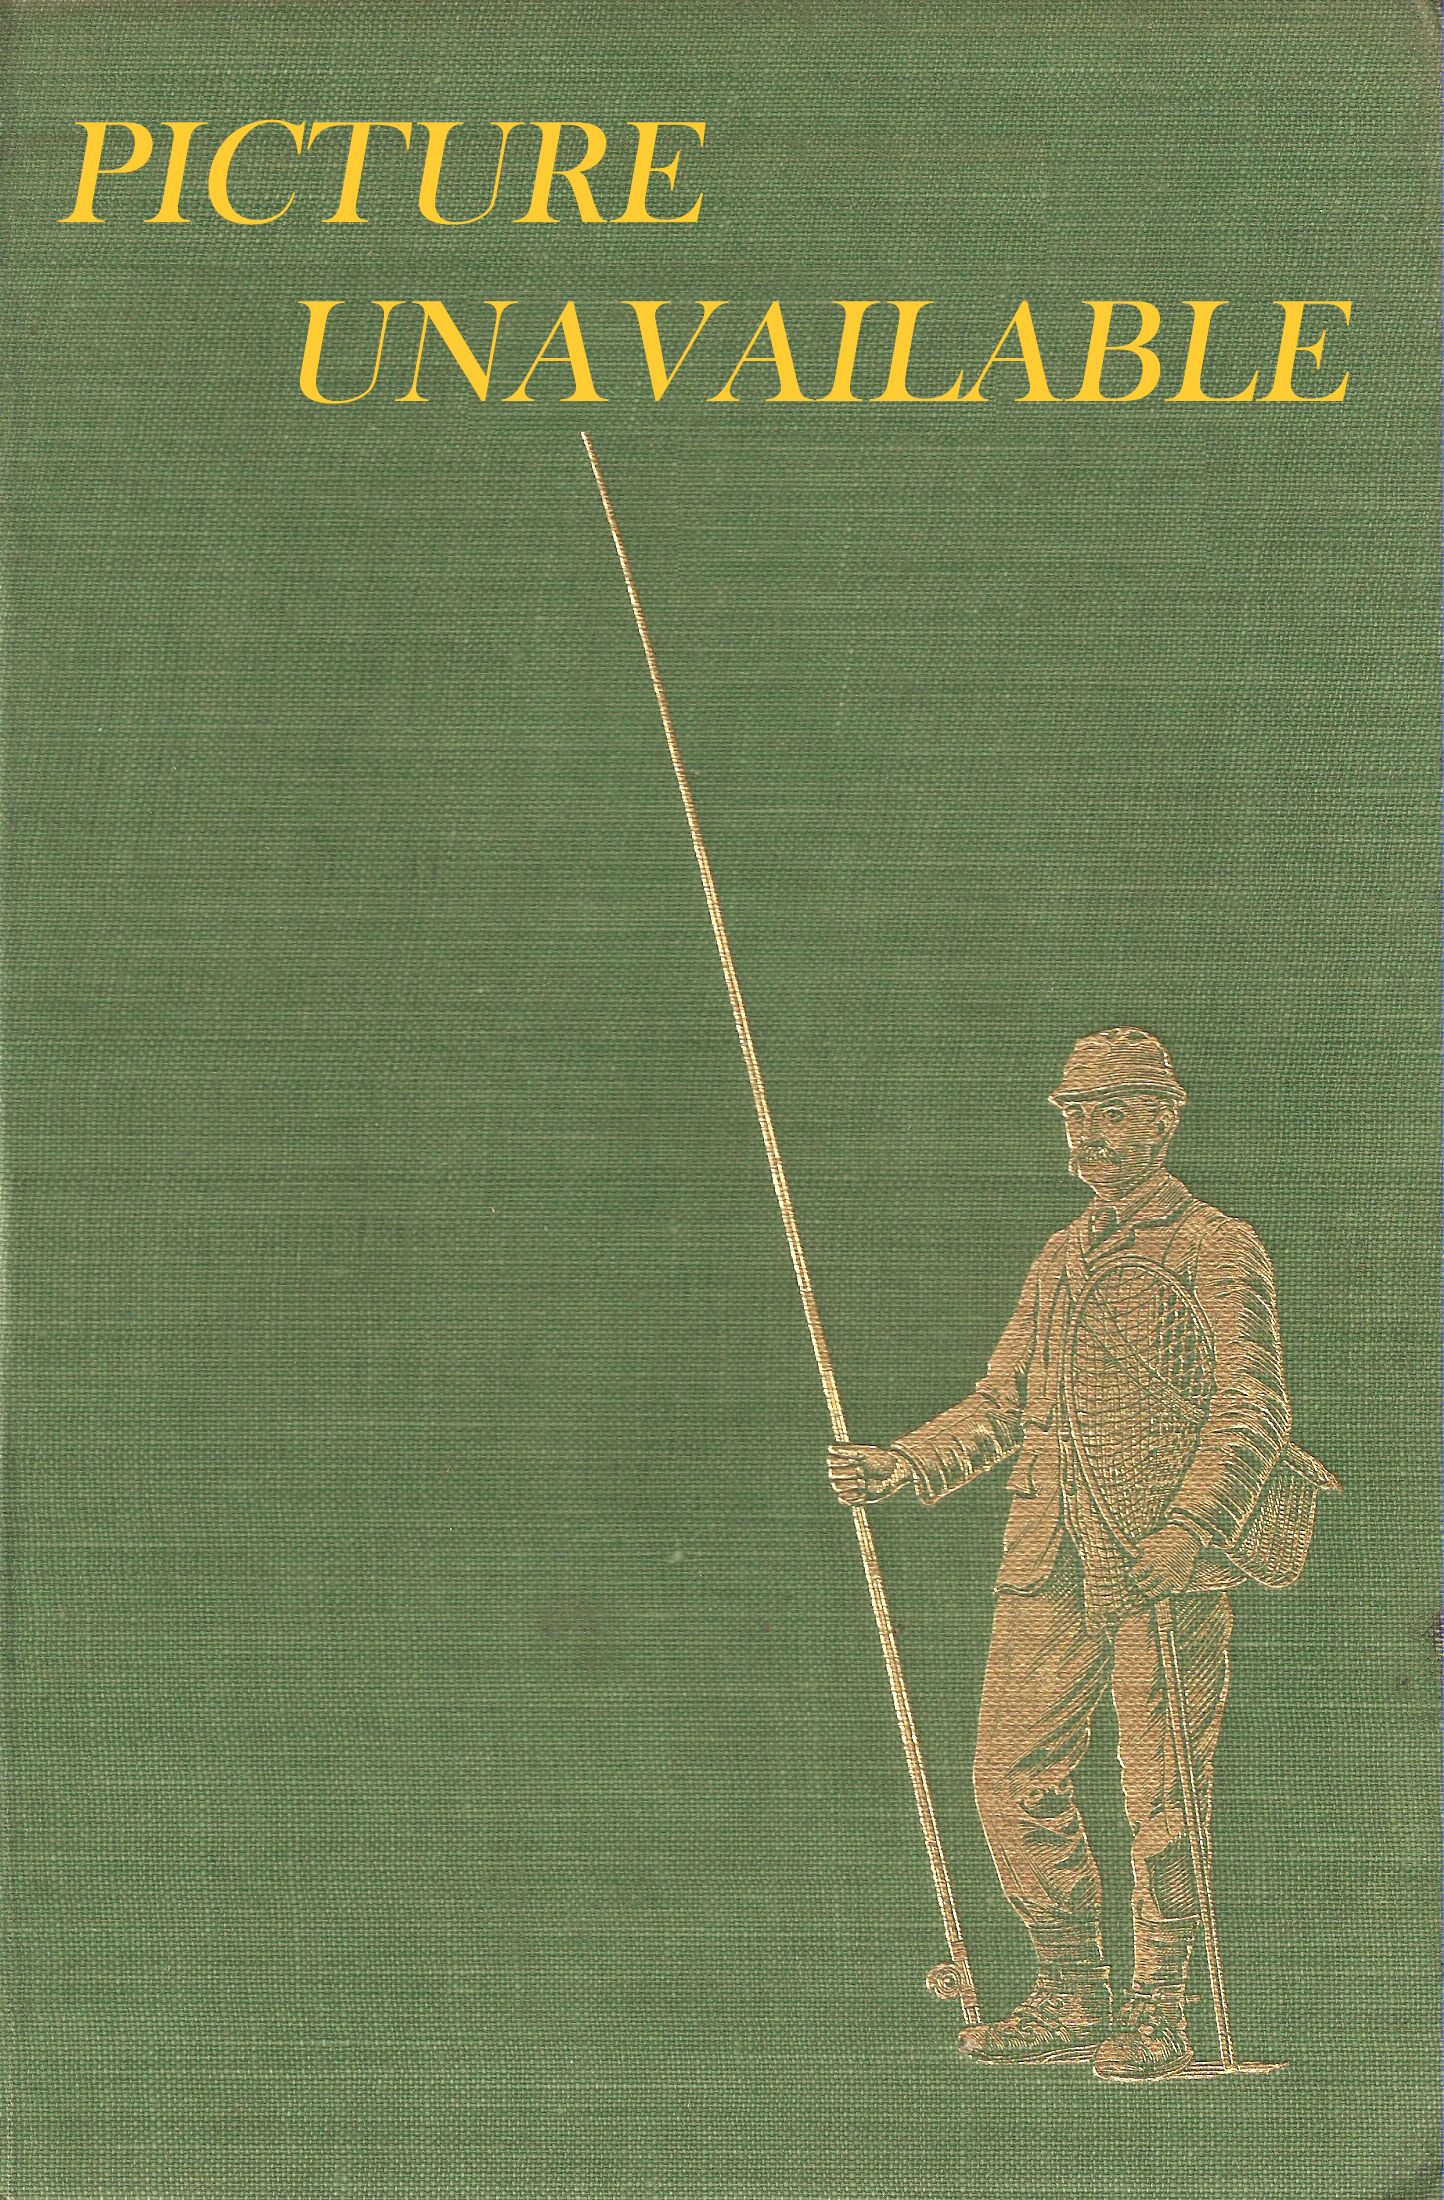 RIVER FLY-FISHING: THEORY AND PRACTICE. By L. Baverstock. Series editor  Kenneth Mansfield.